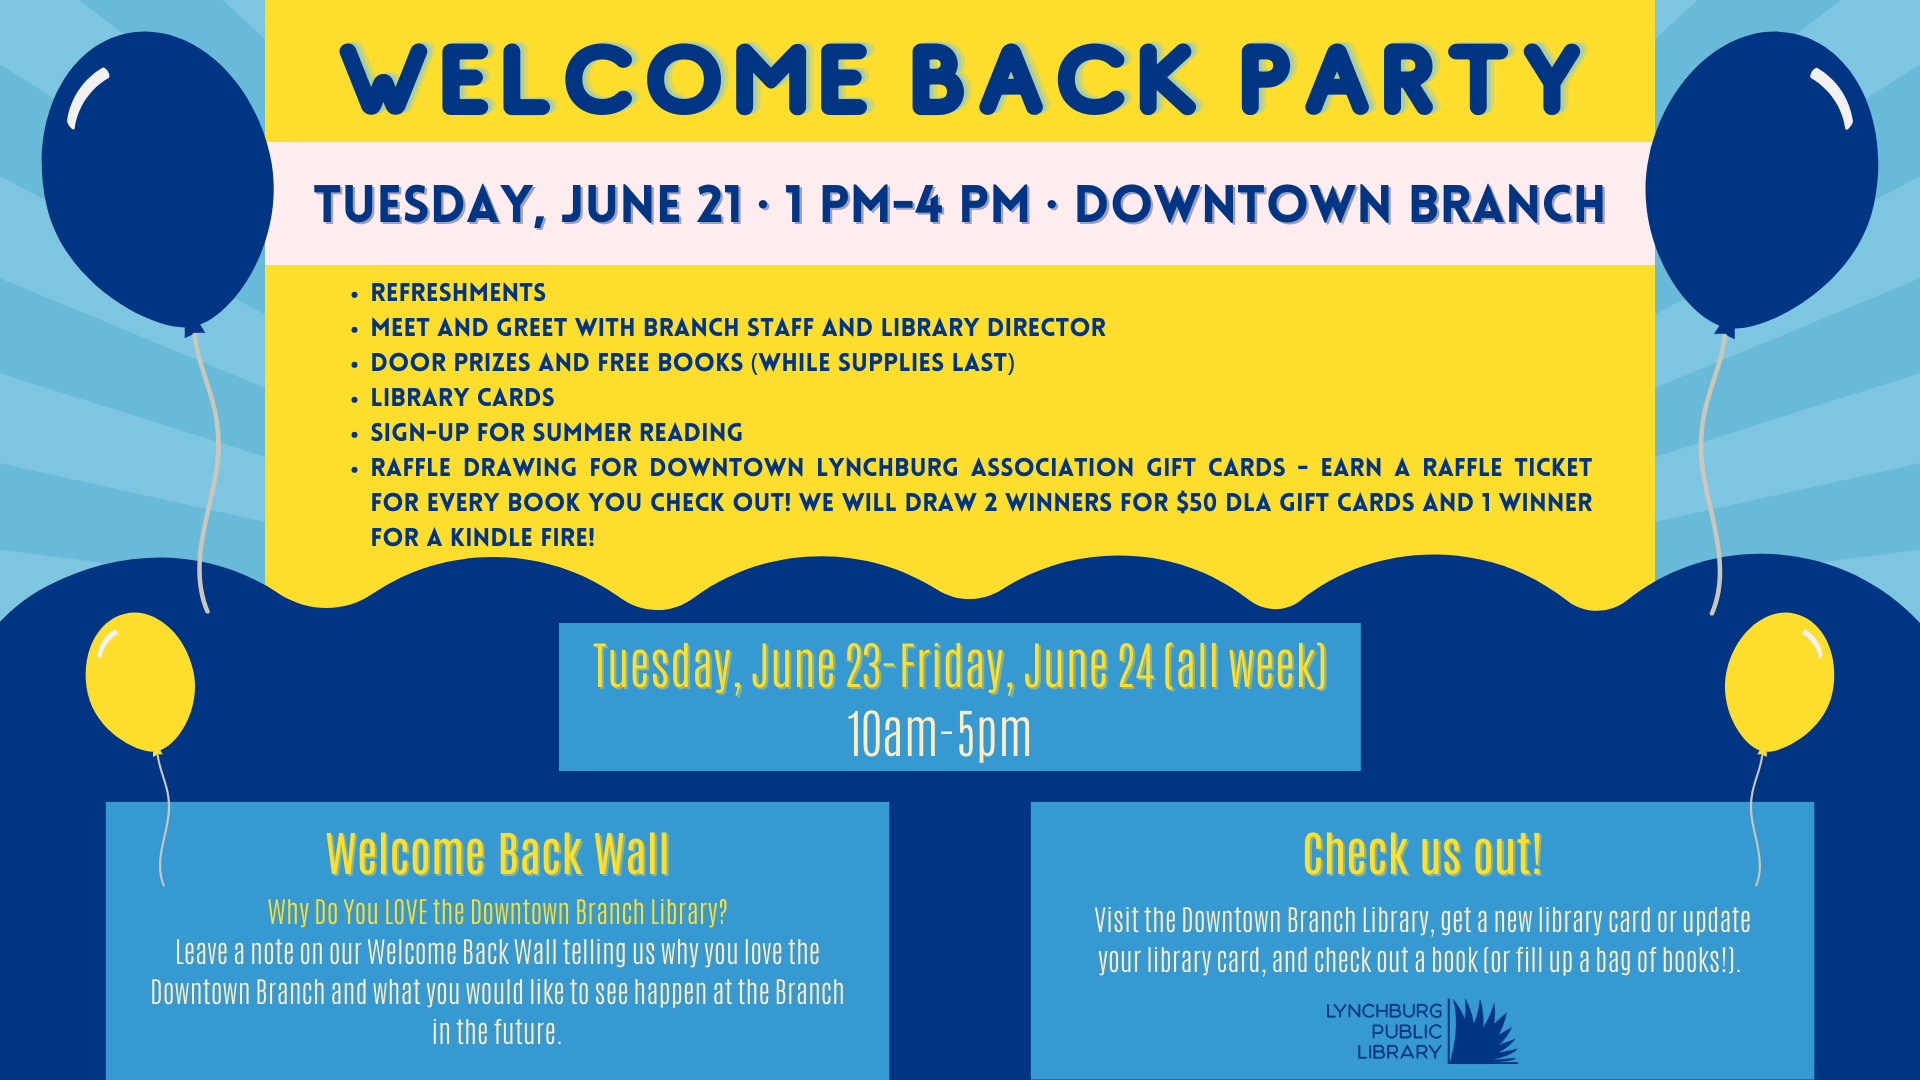 Welcome Back Party at the Downtown Branch Library. Tuesday, June 21 from 1 to 4 pm. Meet Branch Library staff; door prizes and free books while supplies last; library cards; summer reading information; raffle drawing for Downtown Lynchburg Association gift cards and a Kindle Fire.